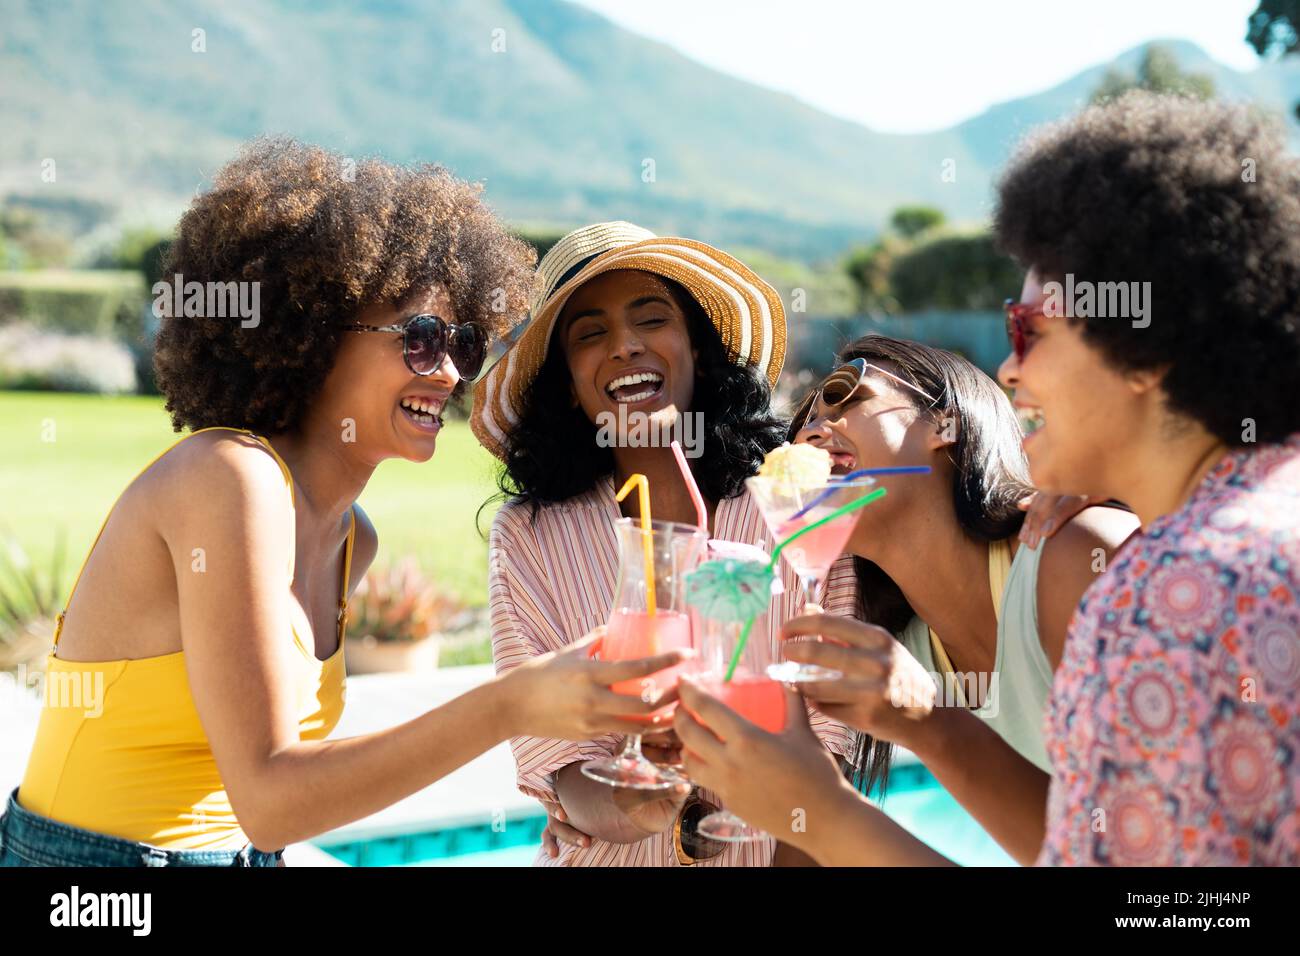 https://c8.alamy.com/comp/2JHJ4NP/cheerful-young-biracial-female-friends-toasting-cocktails-while-having-fun-at-summer-pool-party-2JHJ4NP.jpg